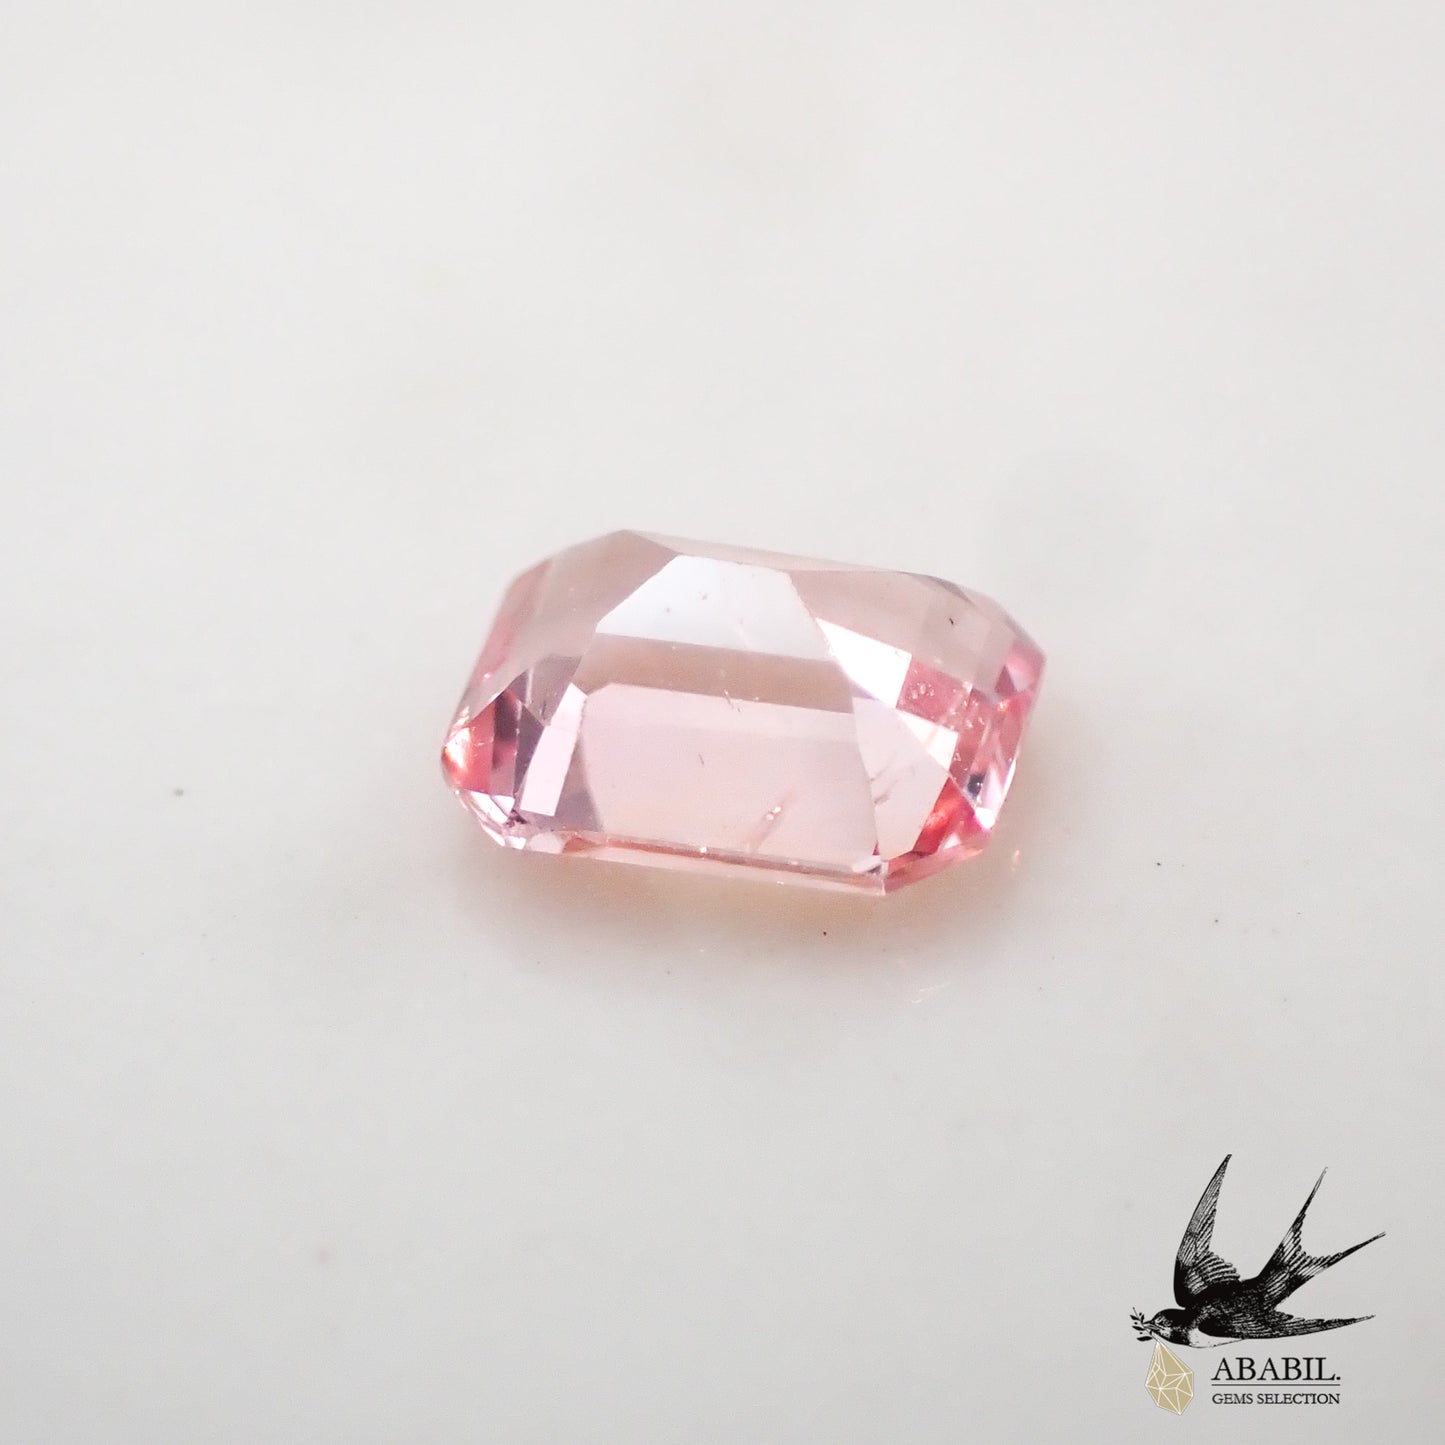 Natural padparadscha sapphire 0.350ct [Sri Lanka] ★Glow specialty ★Fluorescence included 